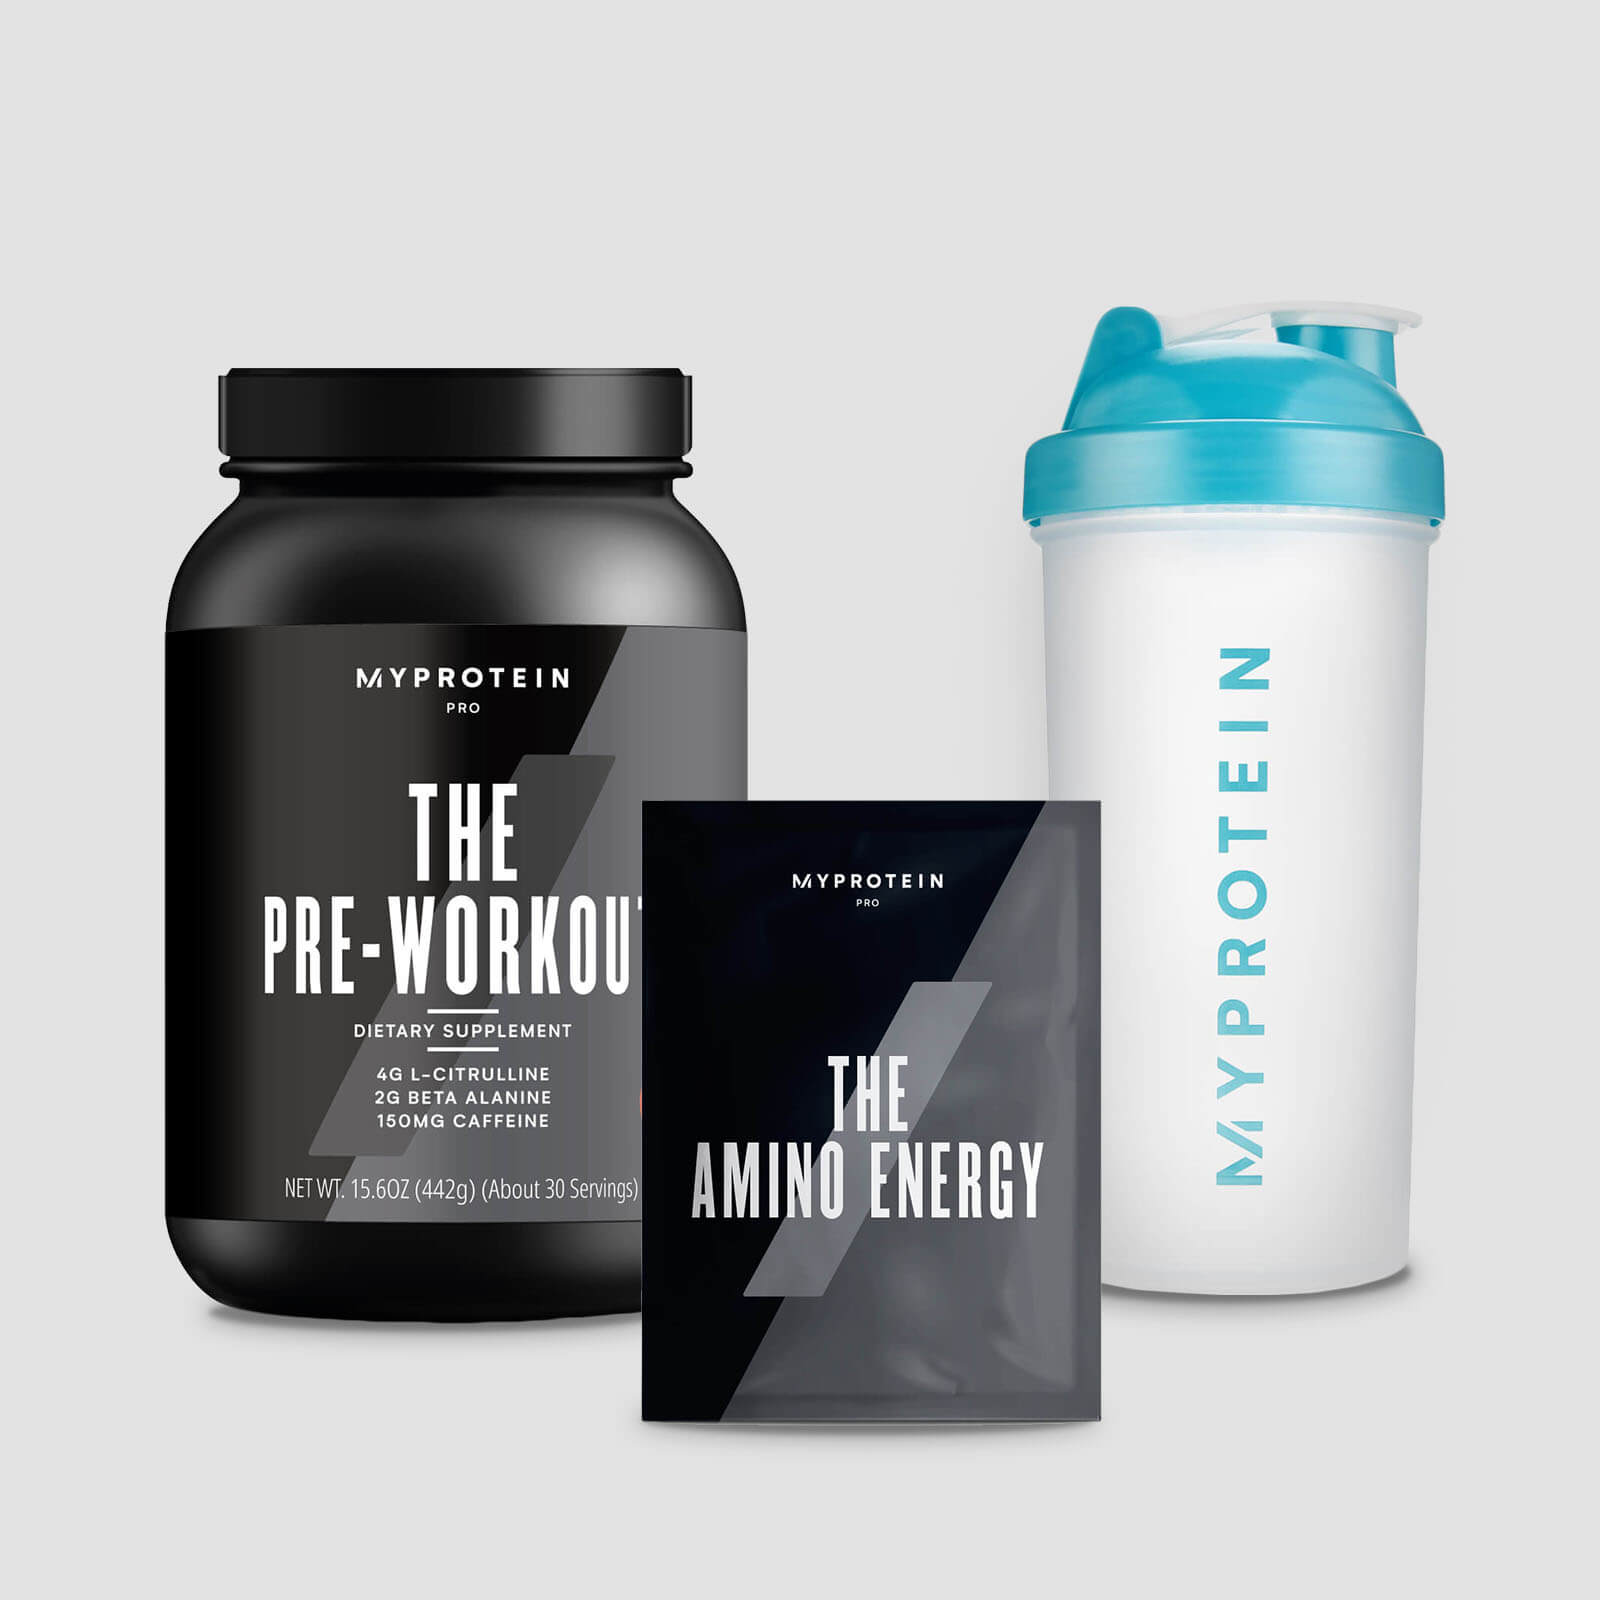 Myprotein Fuel Your Ambition Energy Bundle (US)